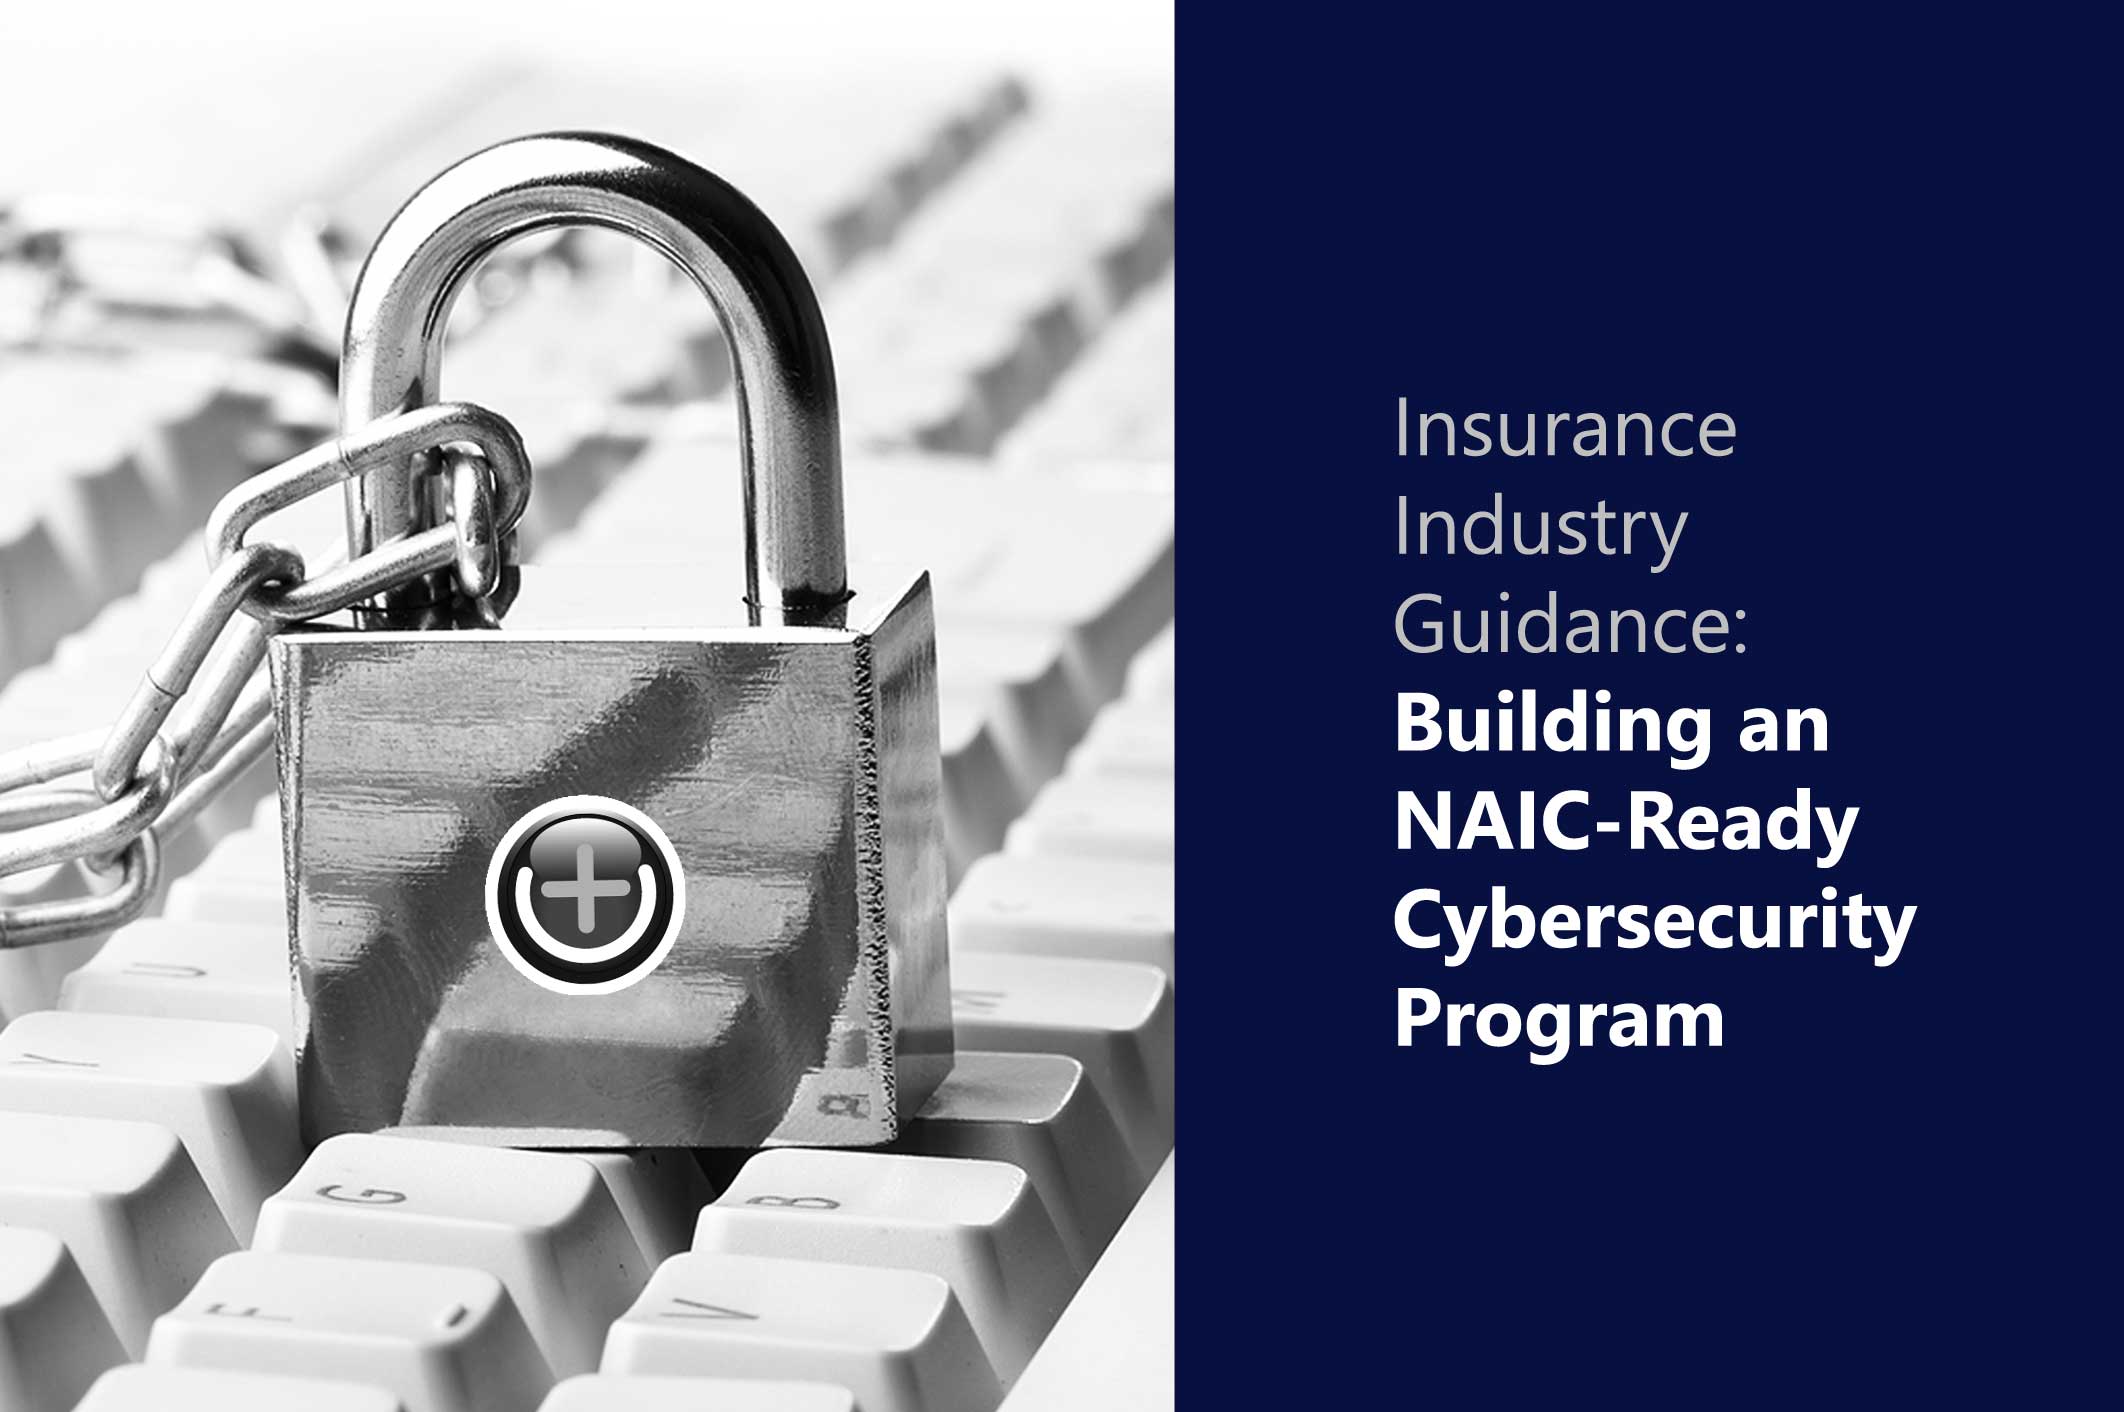 How Insurers Can Build an NAIC-Ready Cybersecurity Program